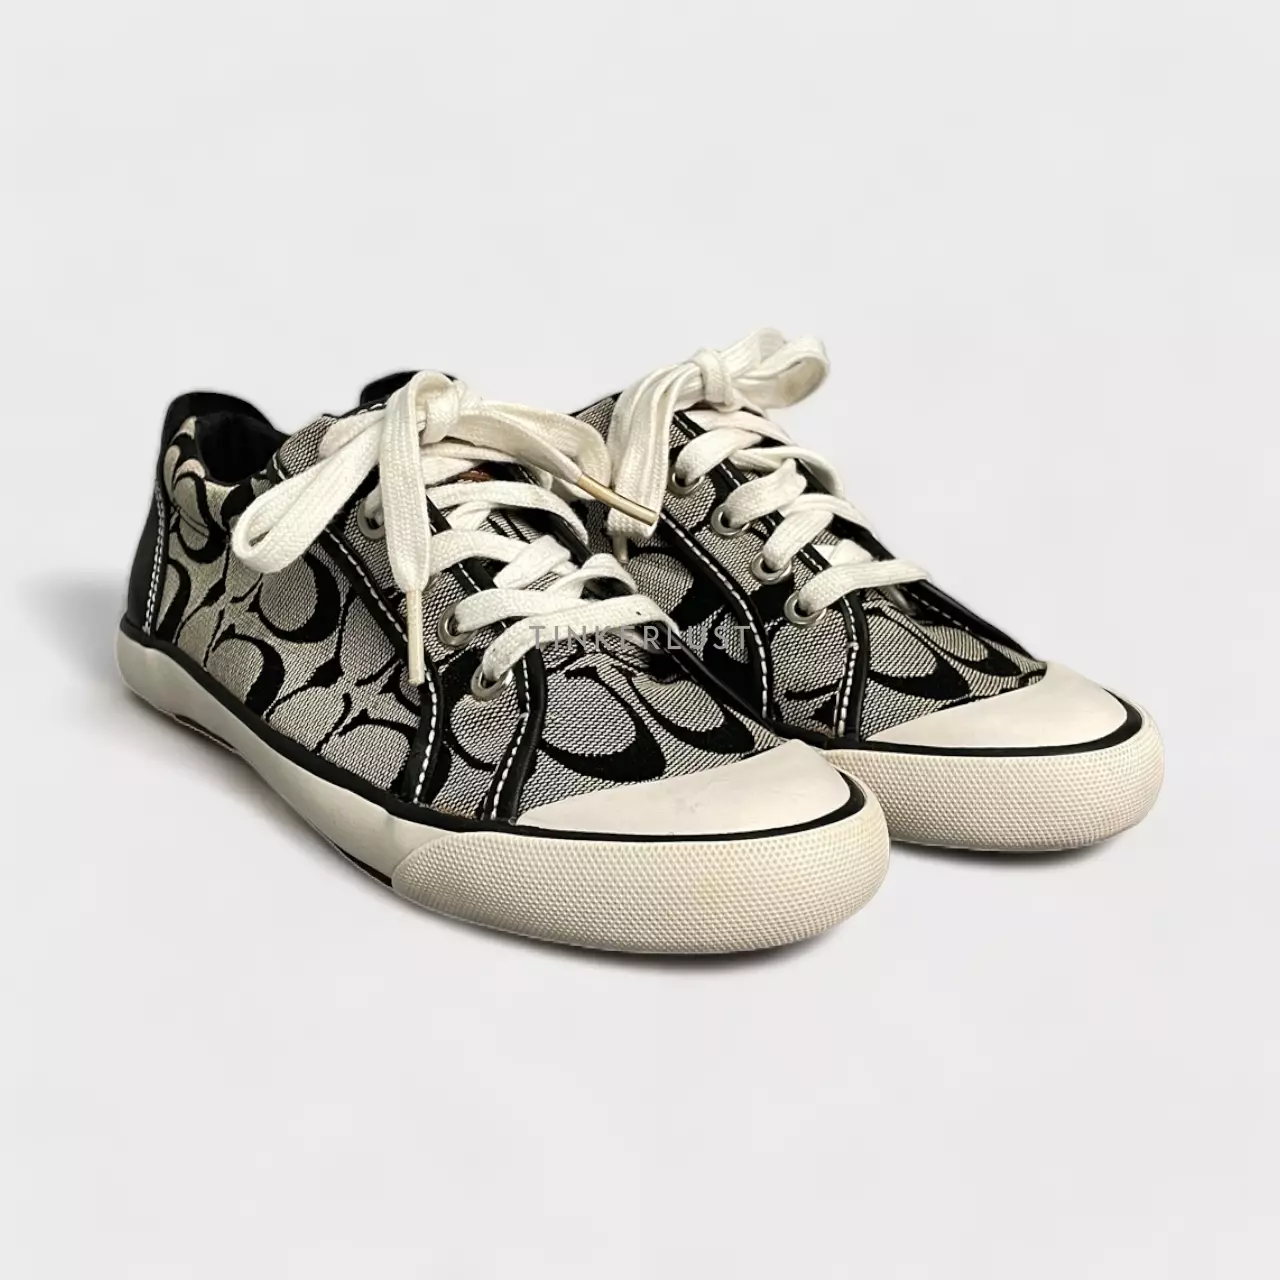 Shop SHOES  SNEAKERS on COACH Indonesia